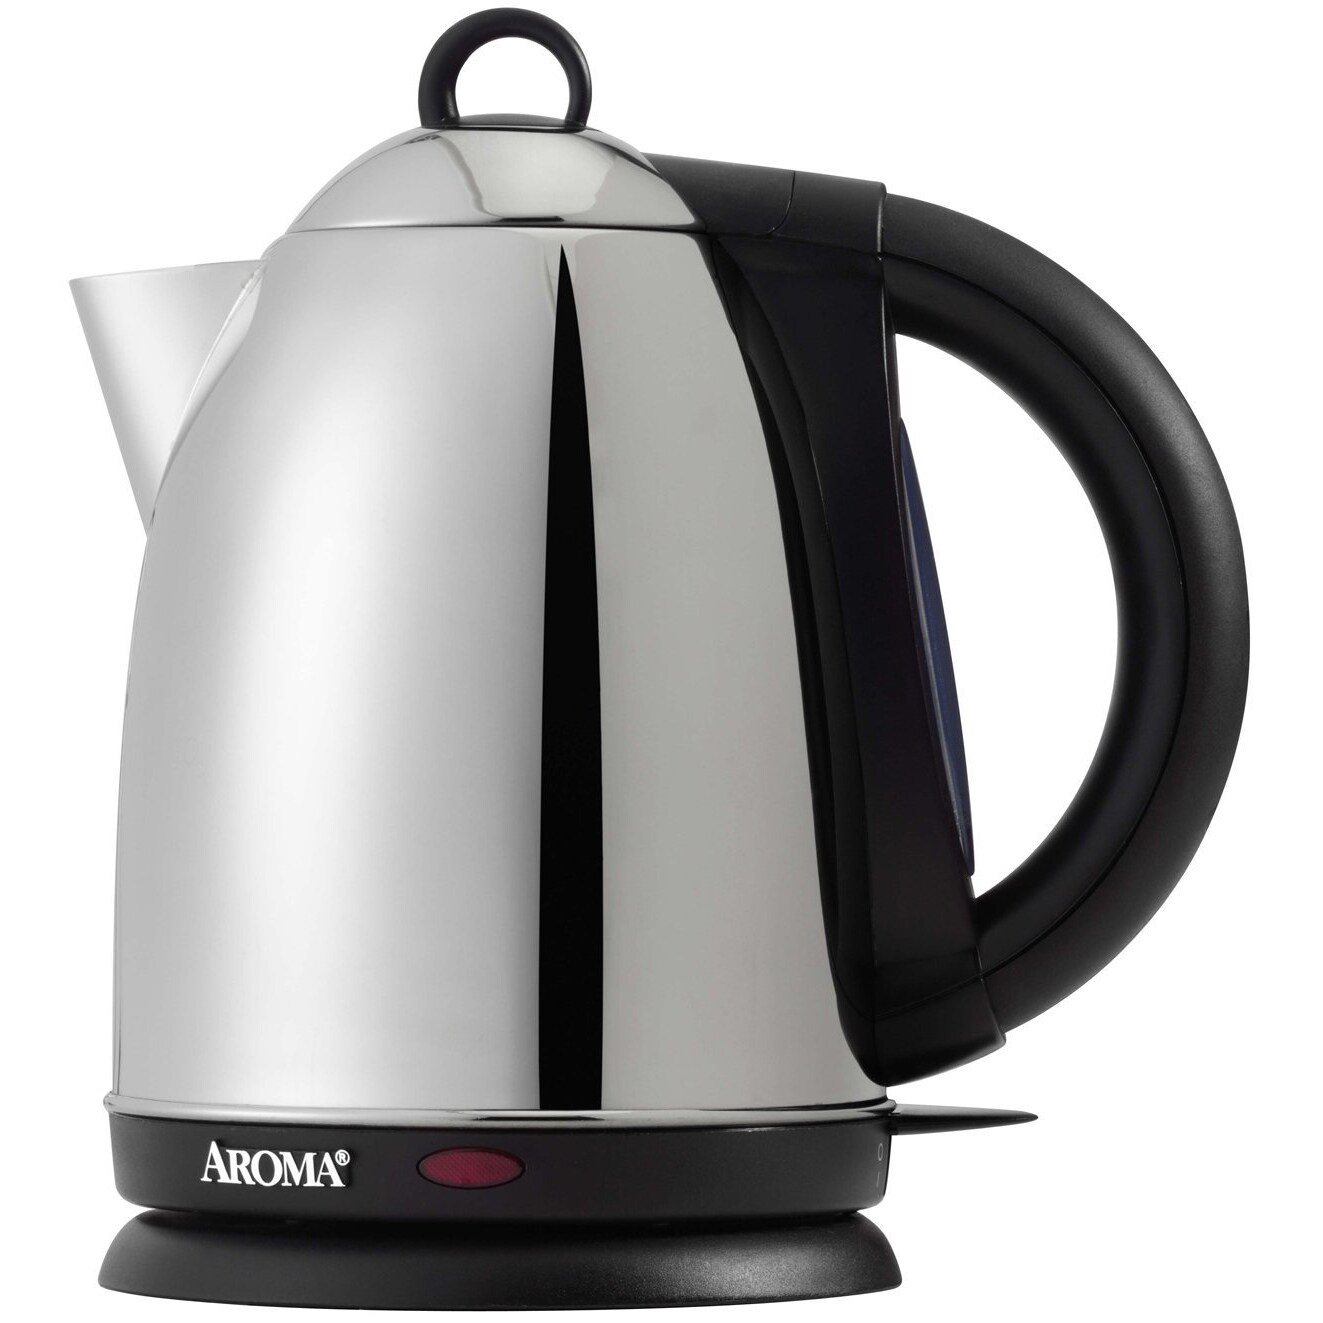 https://ak1.ostkcdn.com/images/products/6401916/Aroma-Stainless-Steel-1.7-liter-Electric-Water-Kettle-8a742735-1187-43db-838f-e1107c1dfa07.jpg